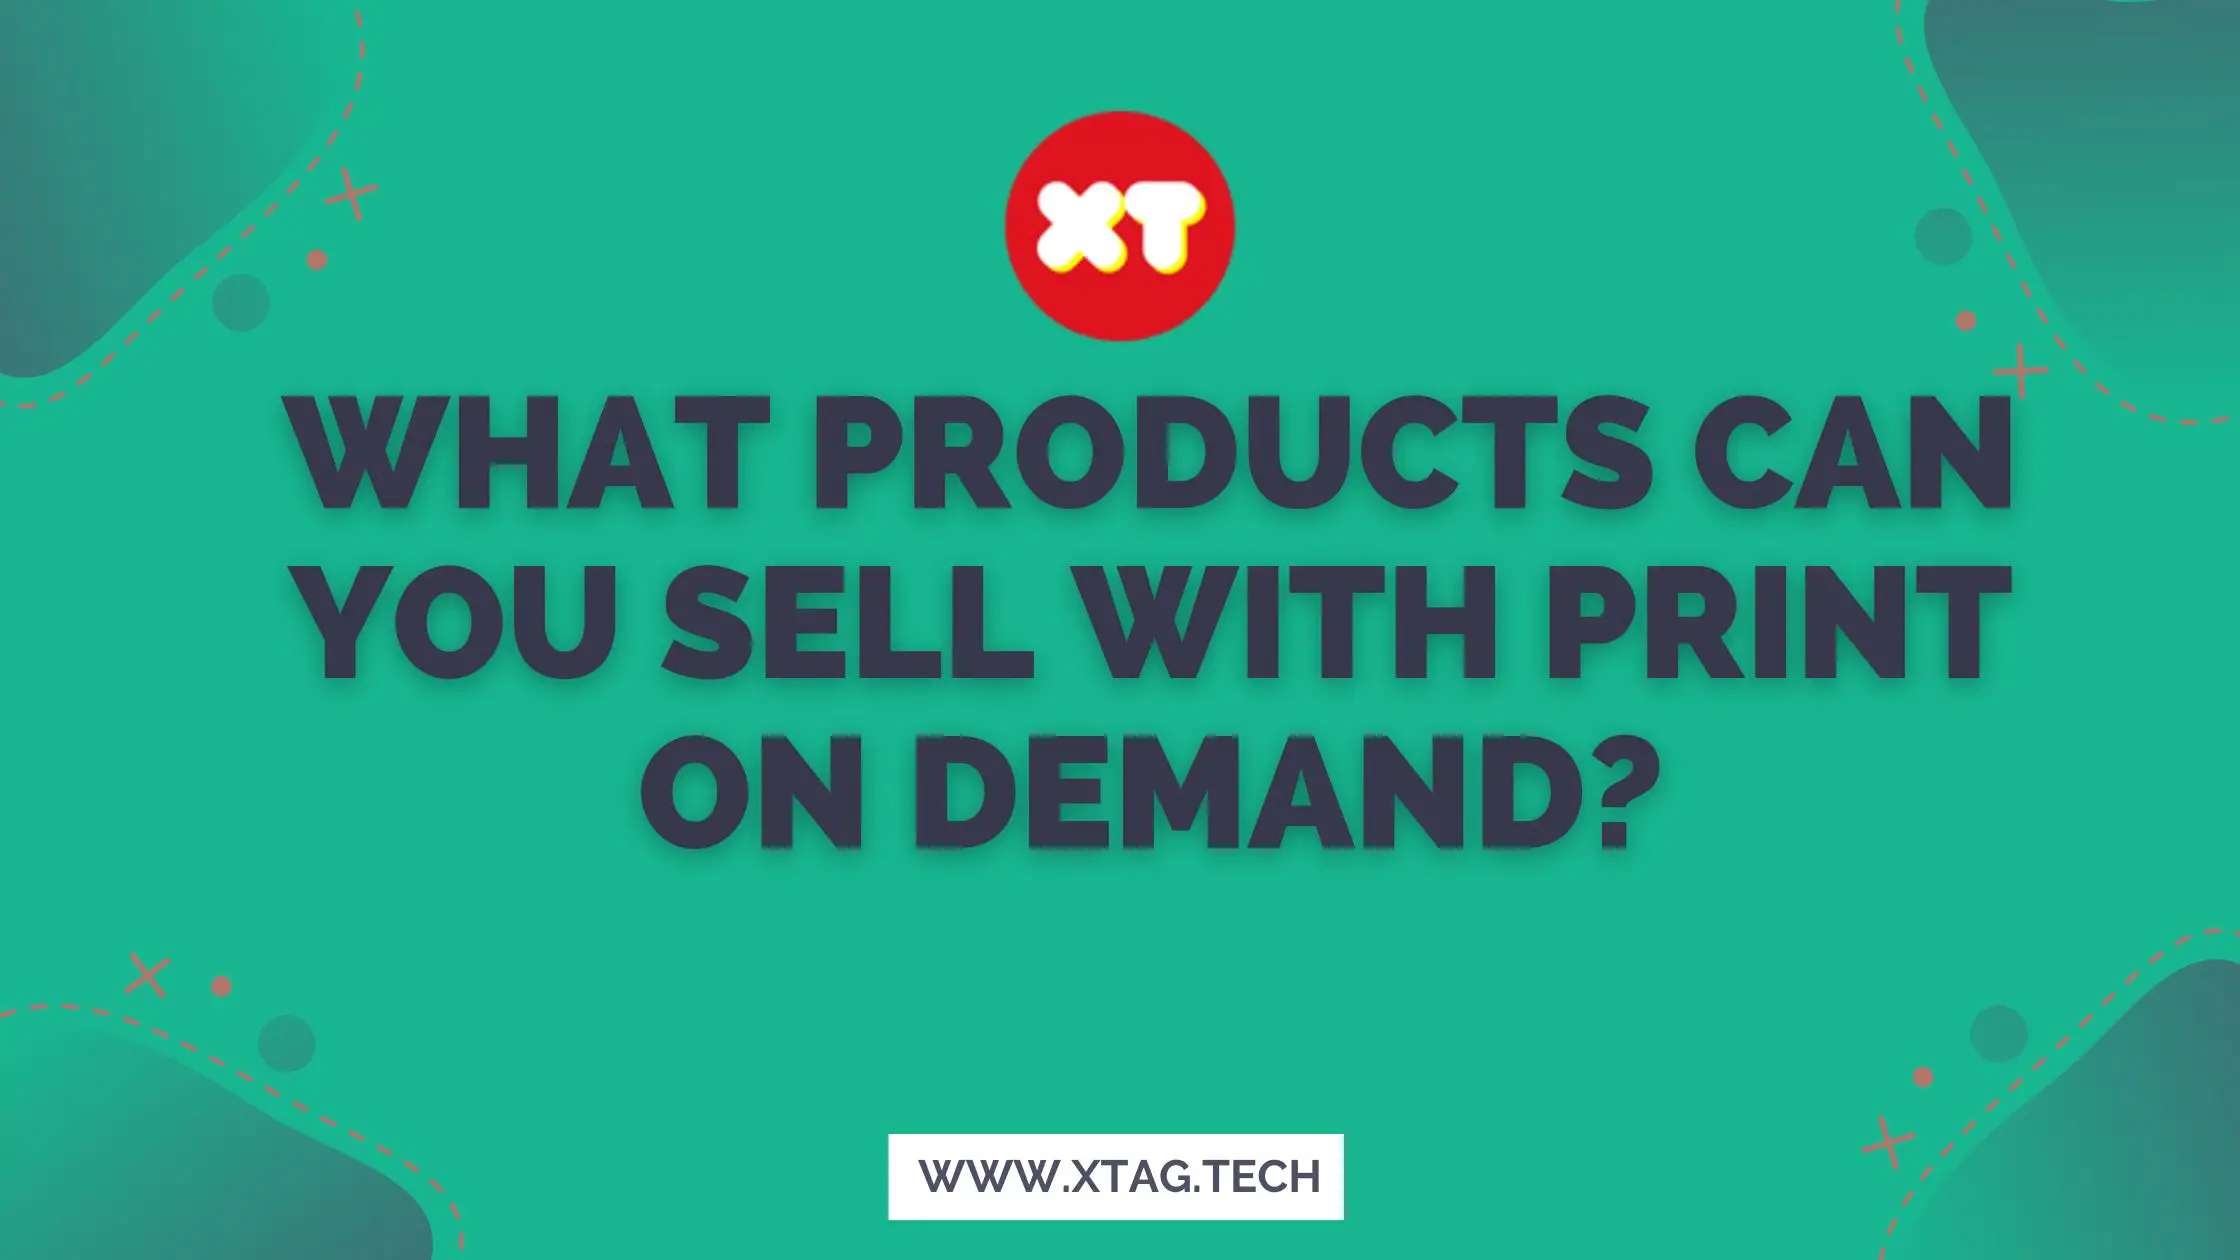 What Products Can You Sell With Print On Demand?